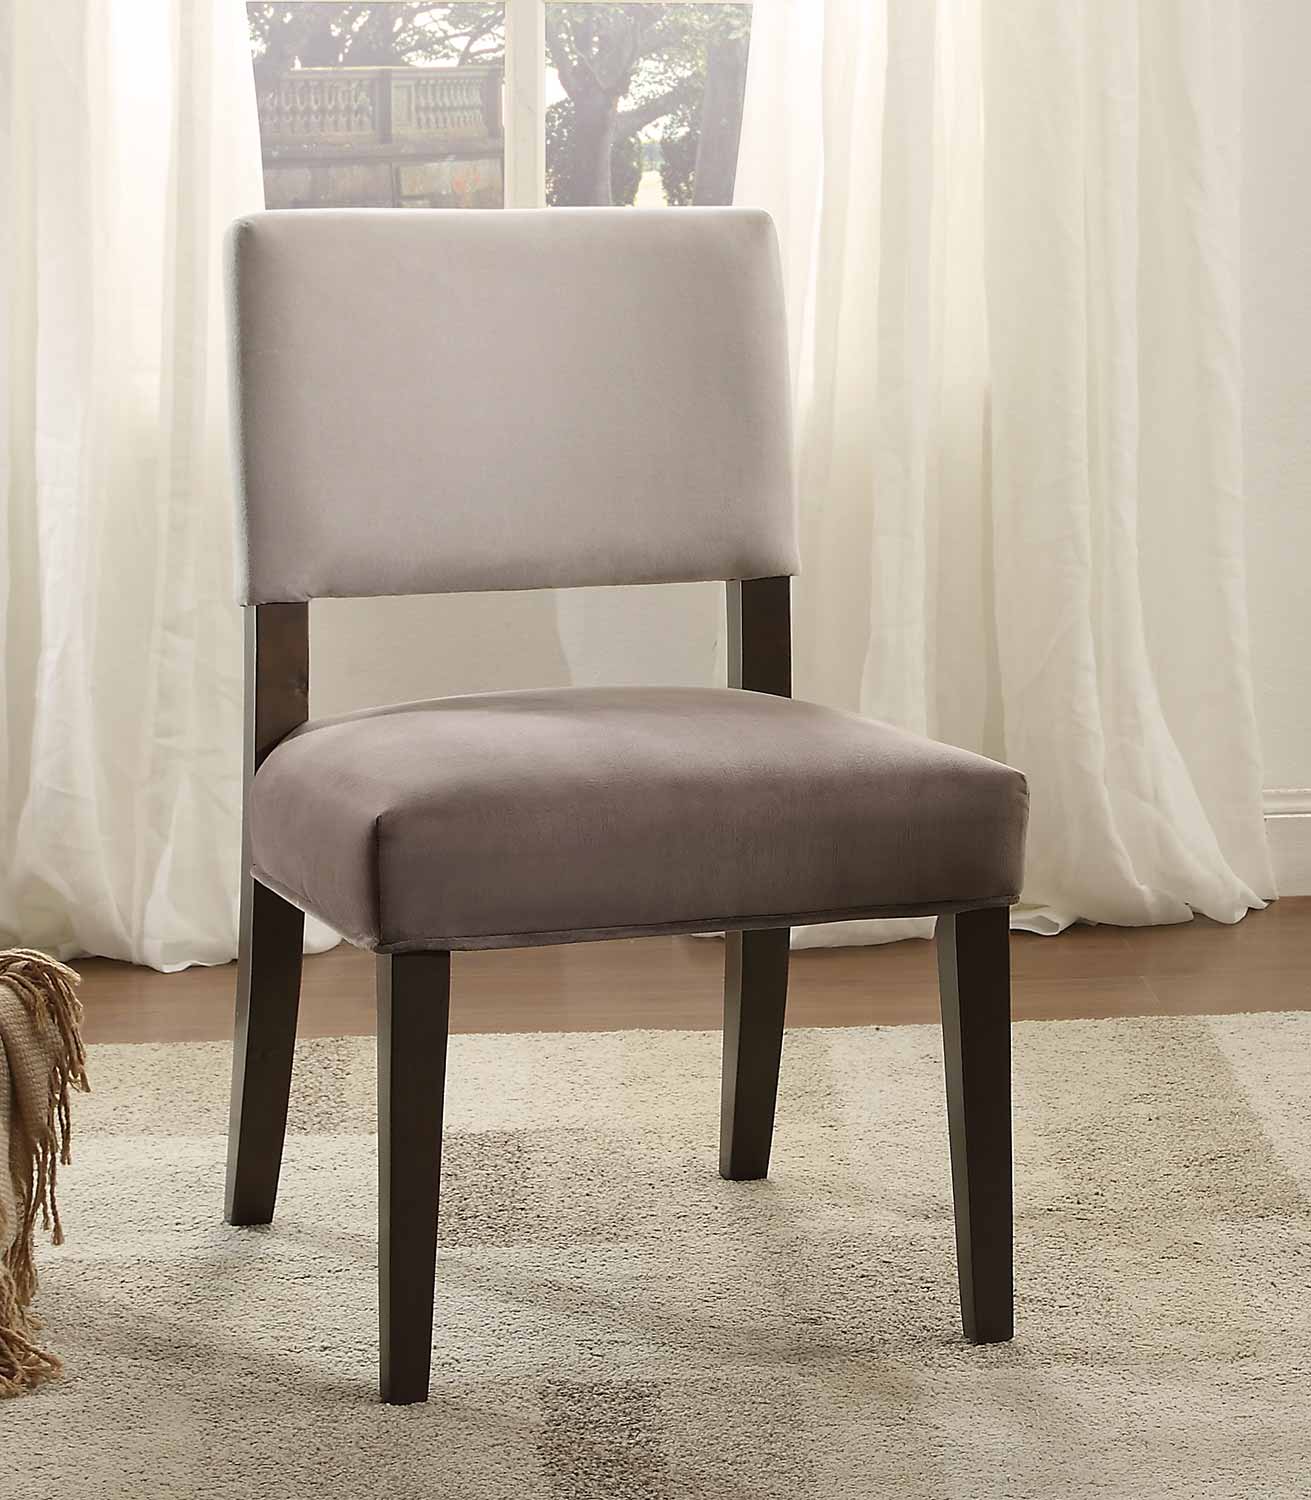 Homelegance Jacinta Two-Toned Accent Chair - Grey